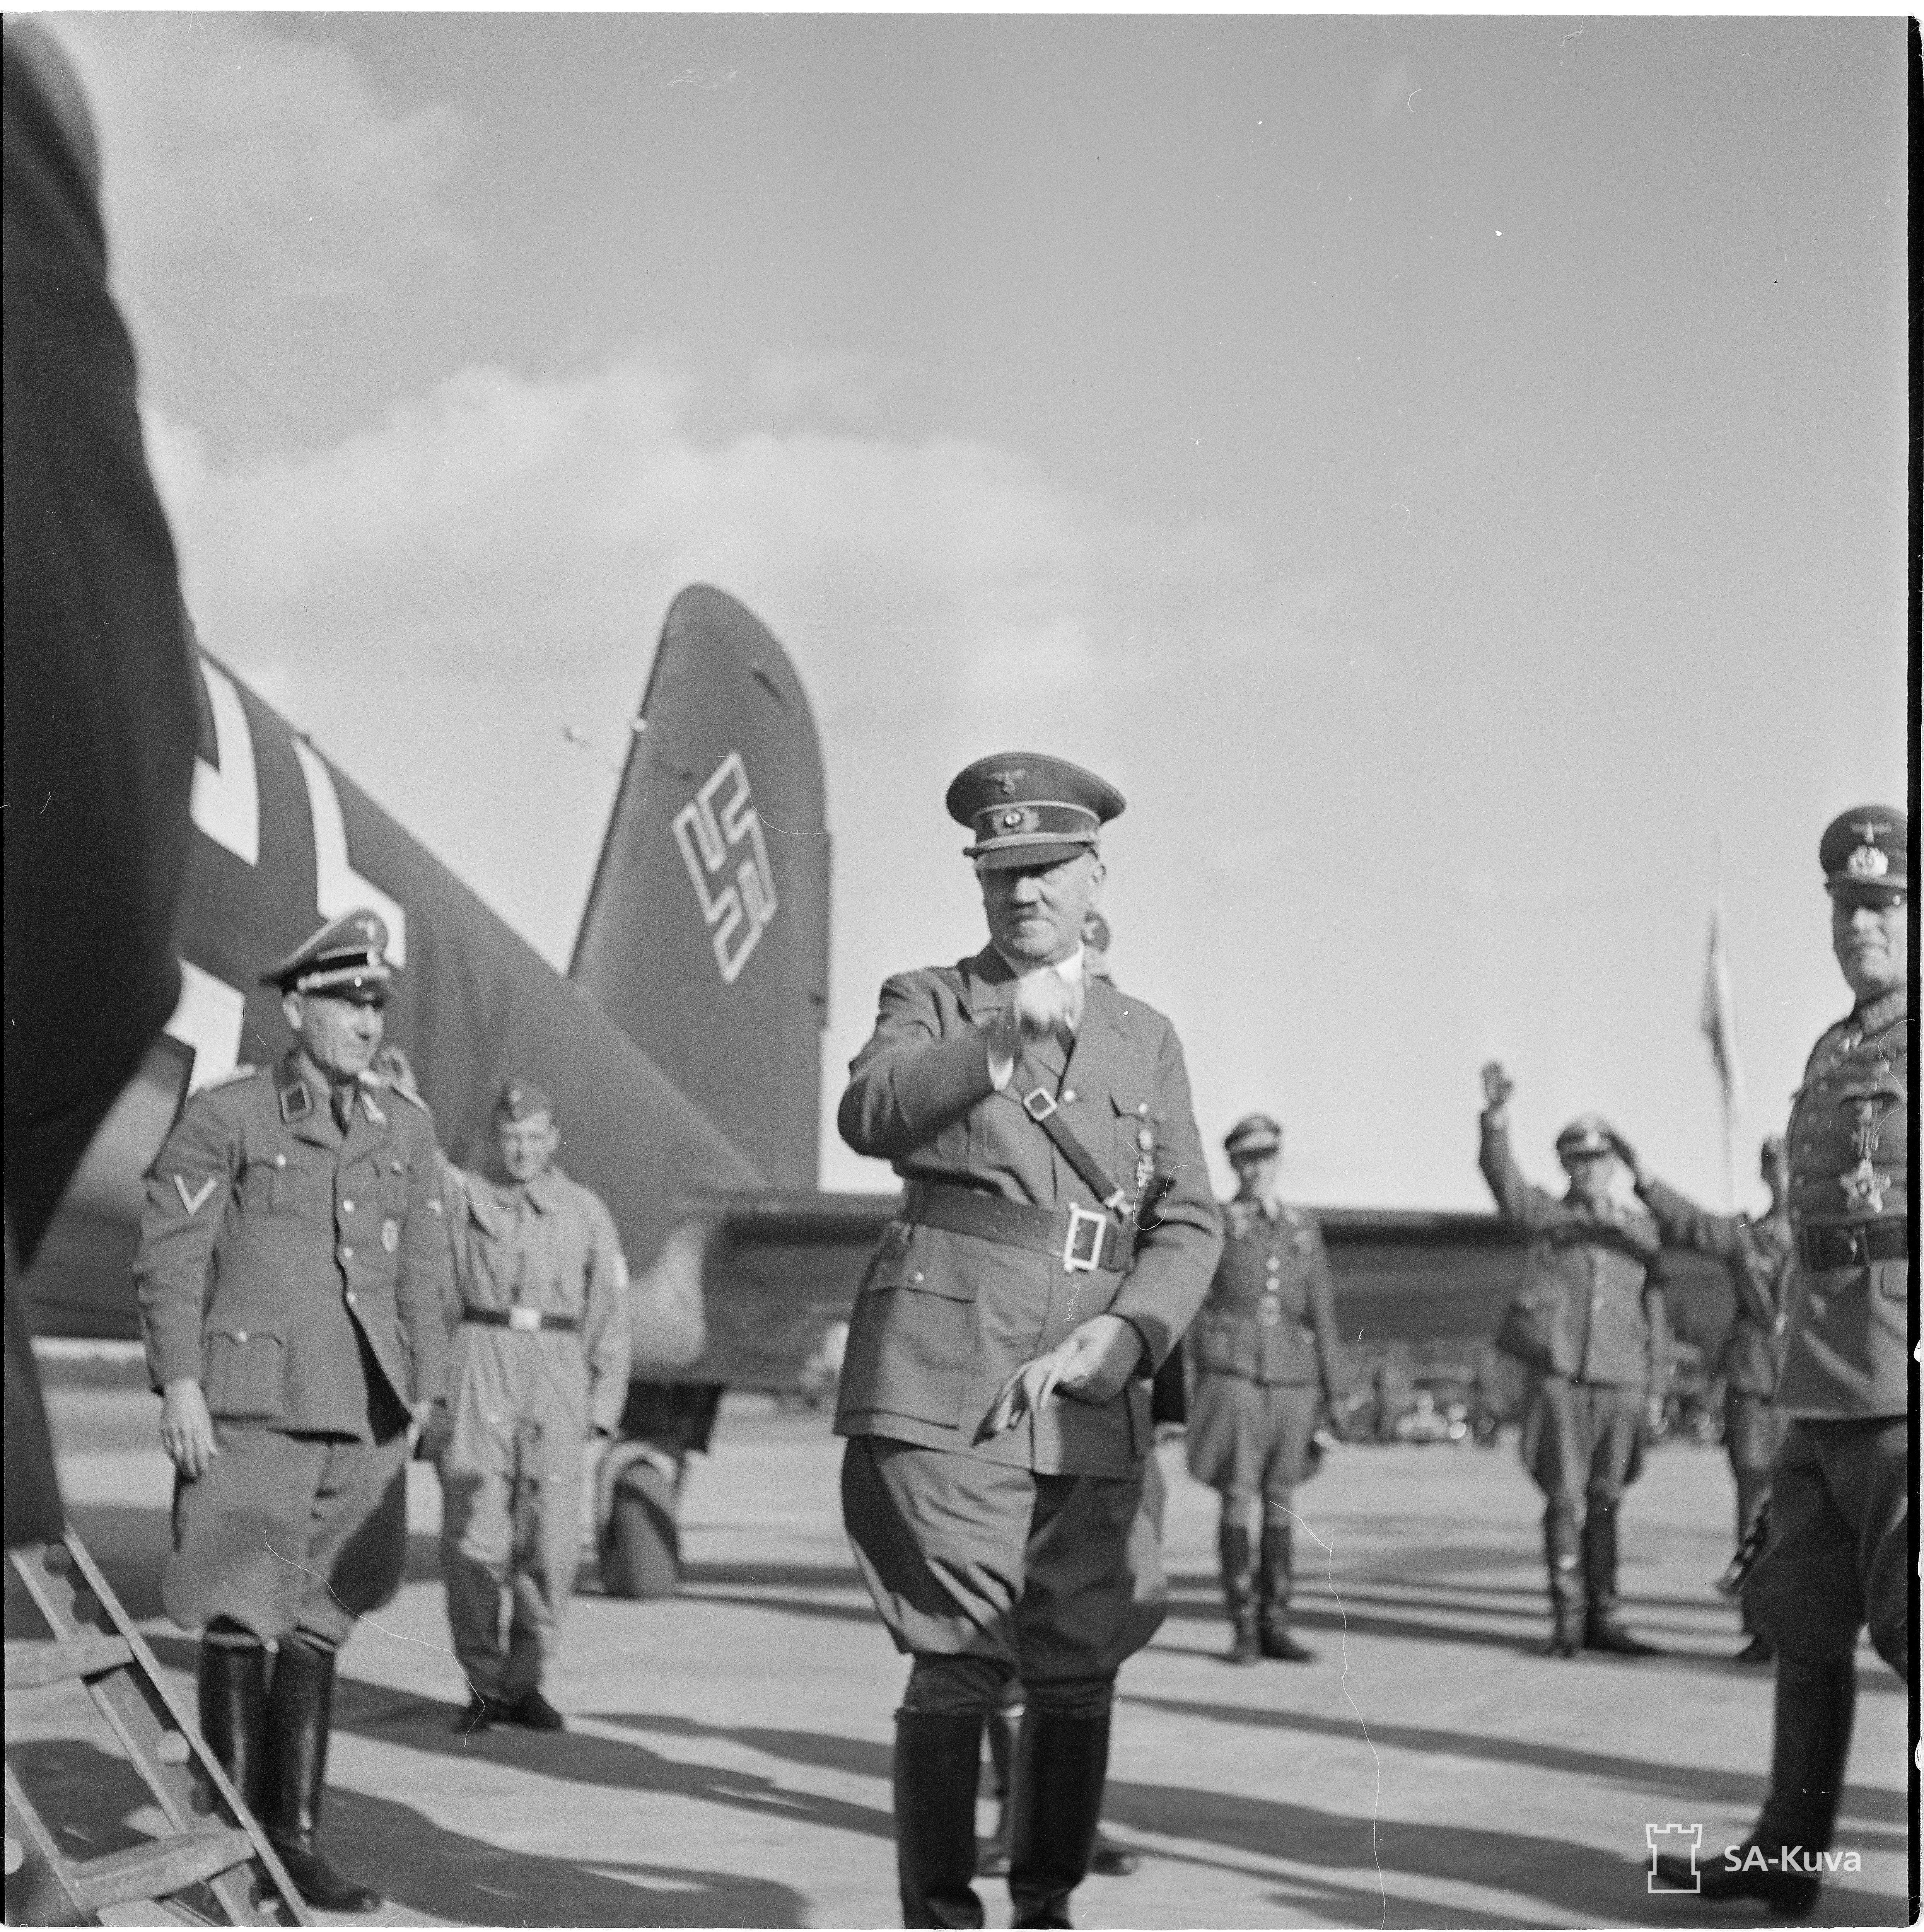 Adolf Hitler at his arrival in Finland in front of his Focke-Wulf Fw 200 Condor